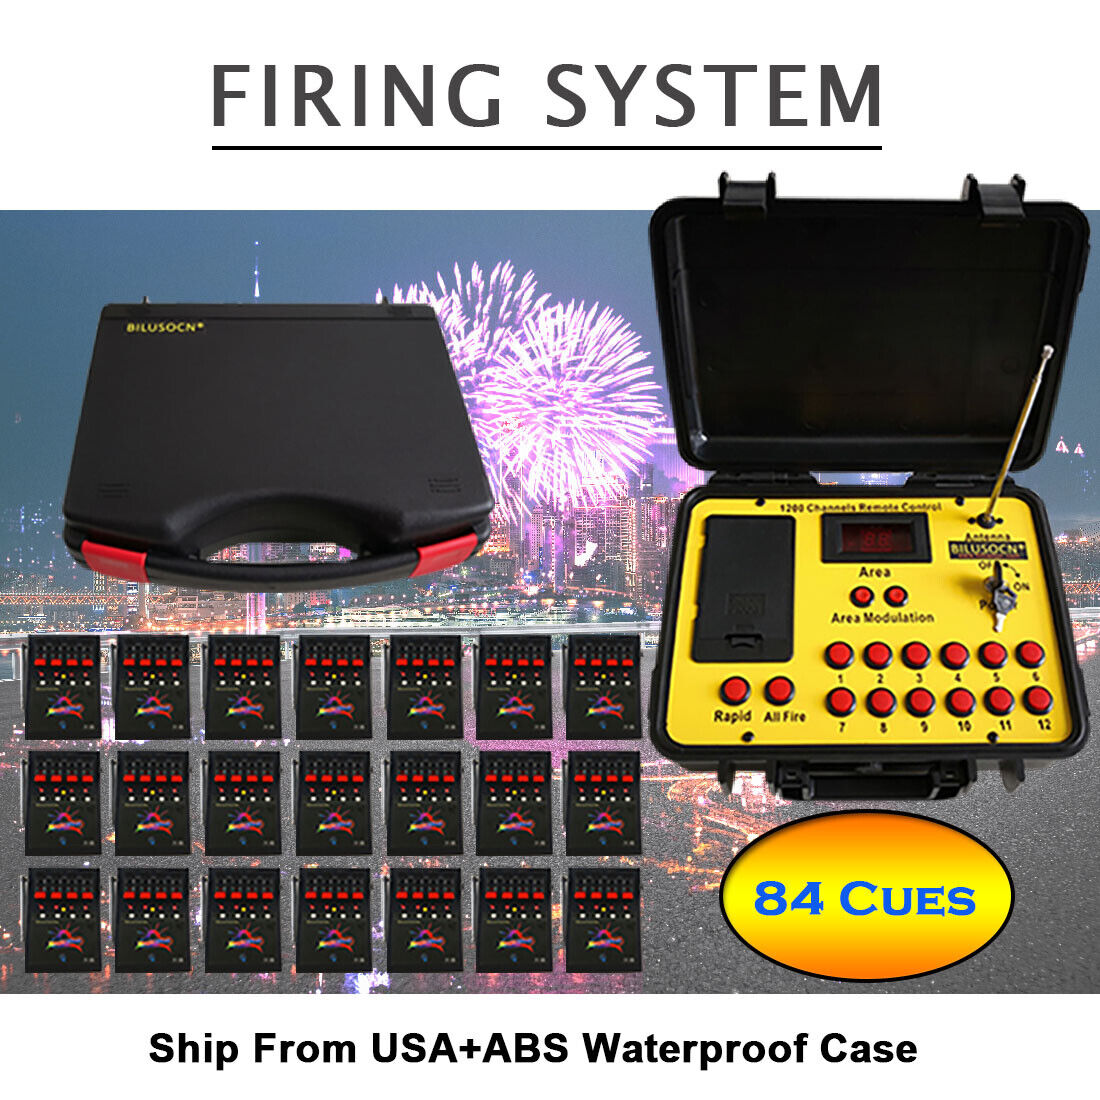 Fee ship 84 Cues fireworks firing system 500M Long distance.Stage effects